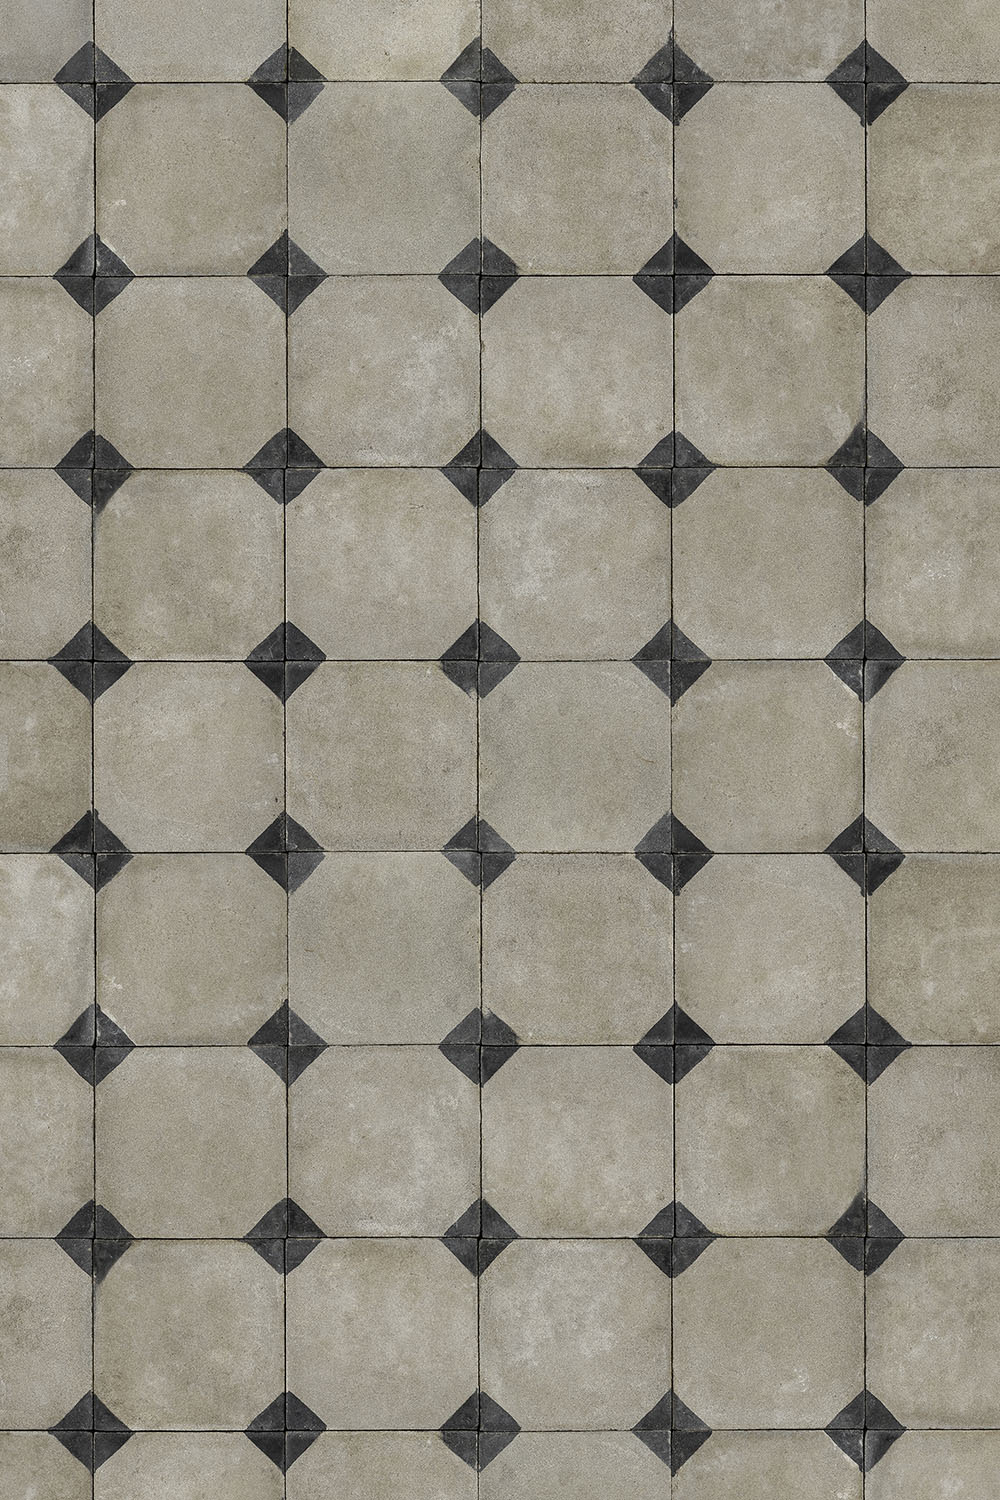 Tiled French floor vinyl backdrop with much history and charm